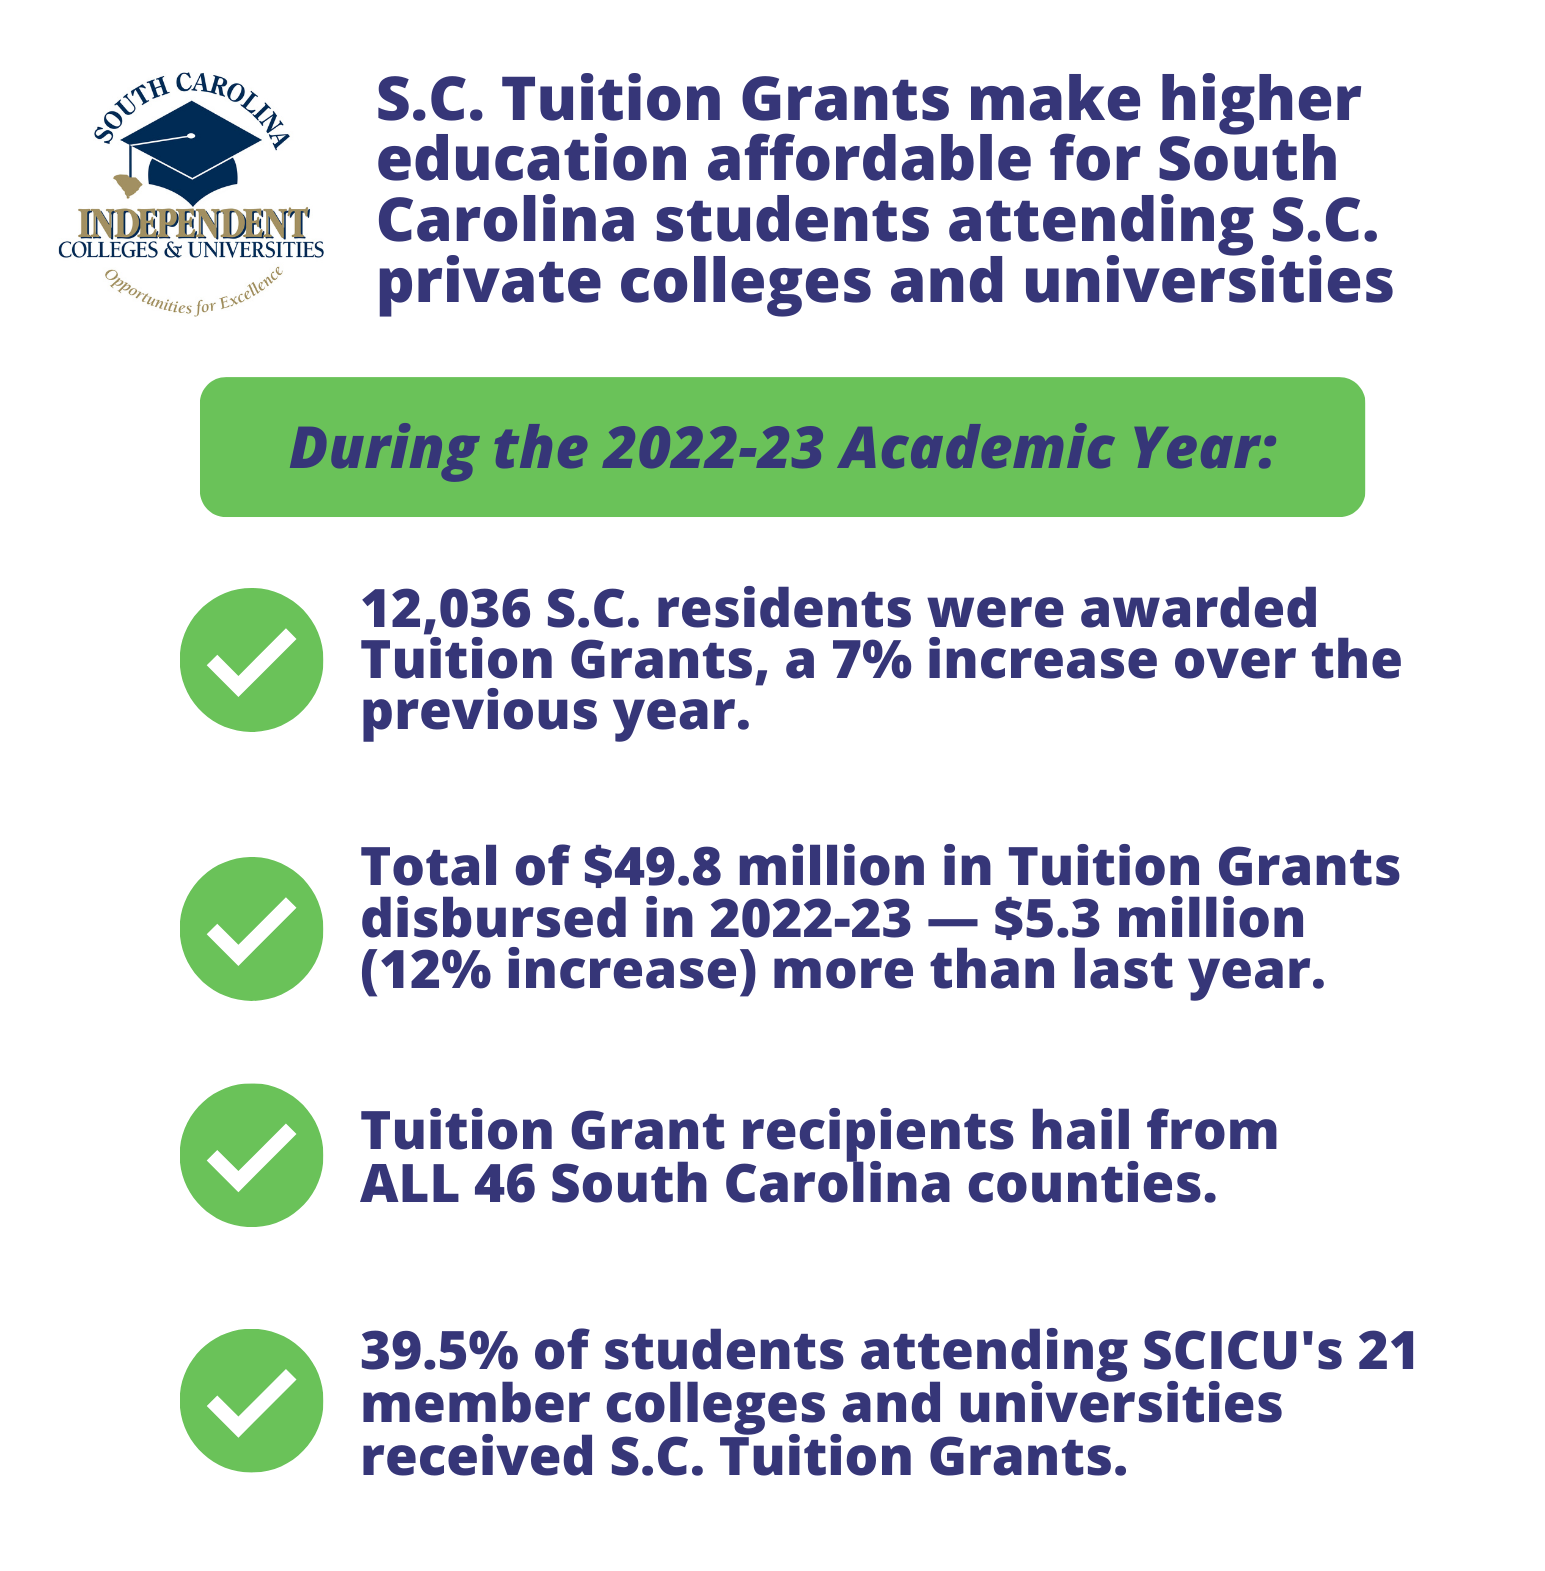 S.C. Tuition Grants make dreams come true for South Carolina residents